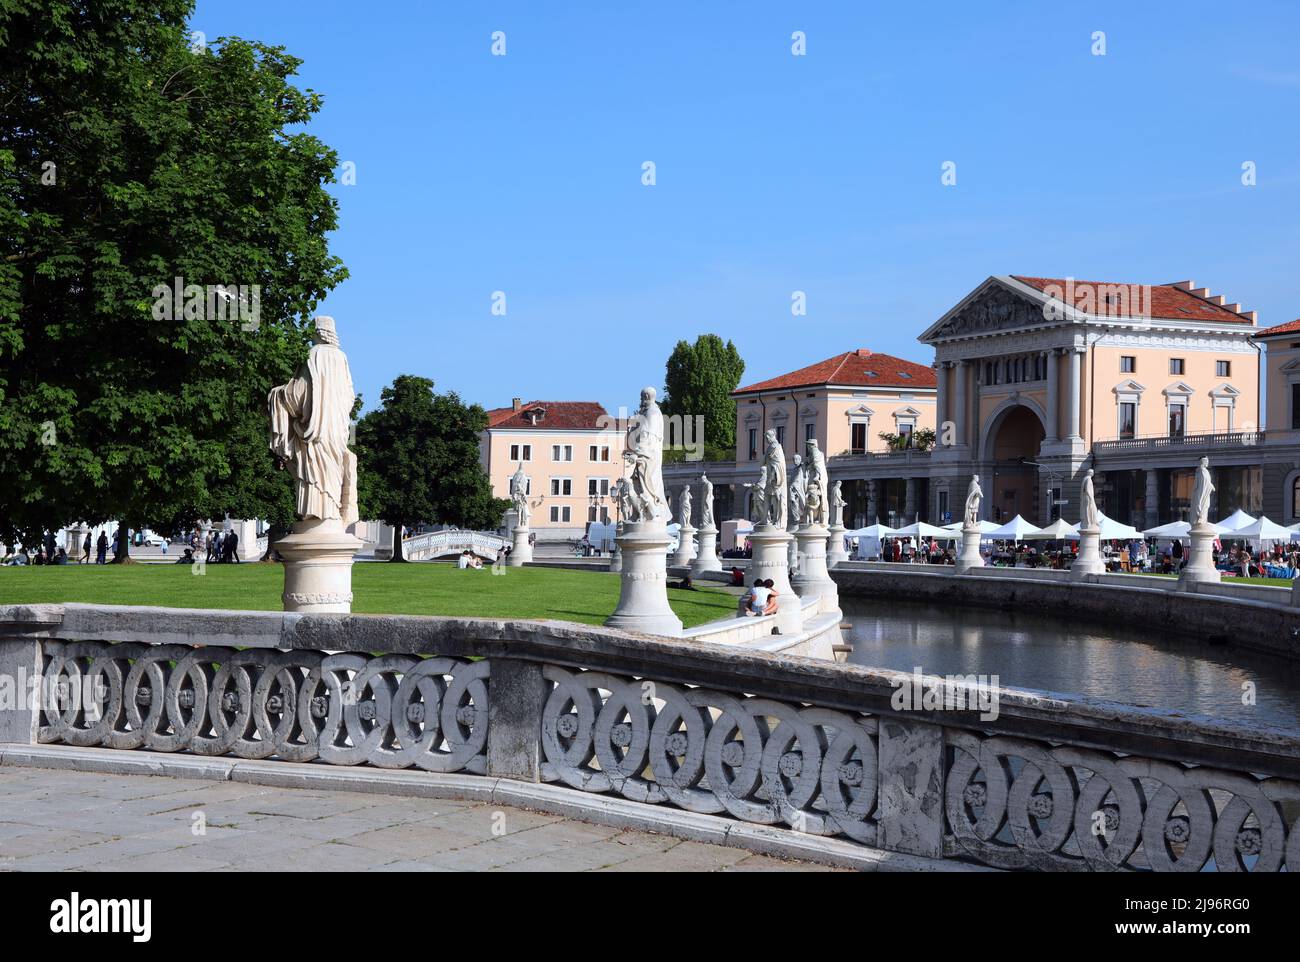 Prato della Valle in Padua City in ITALY in Veneto REGION is a wide public square with many statues of famous historical figures and a small water can Stock Photo